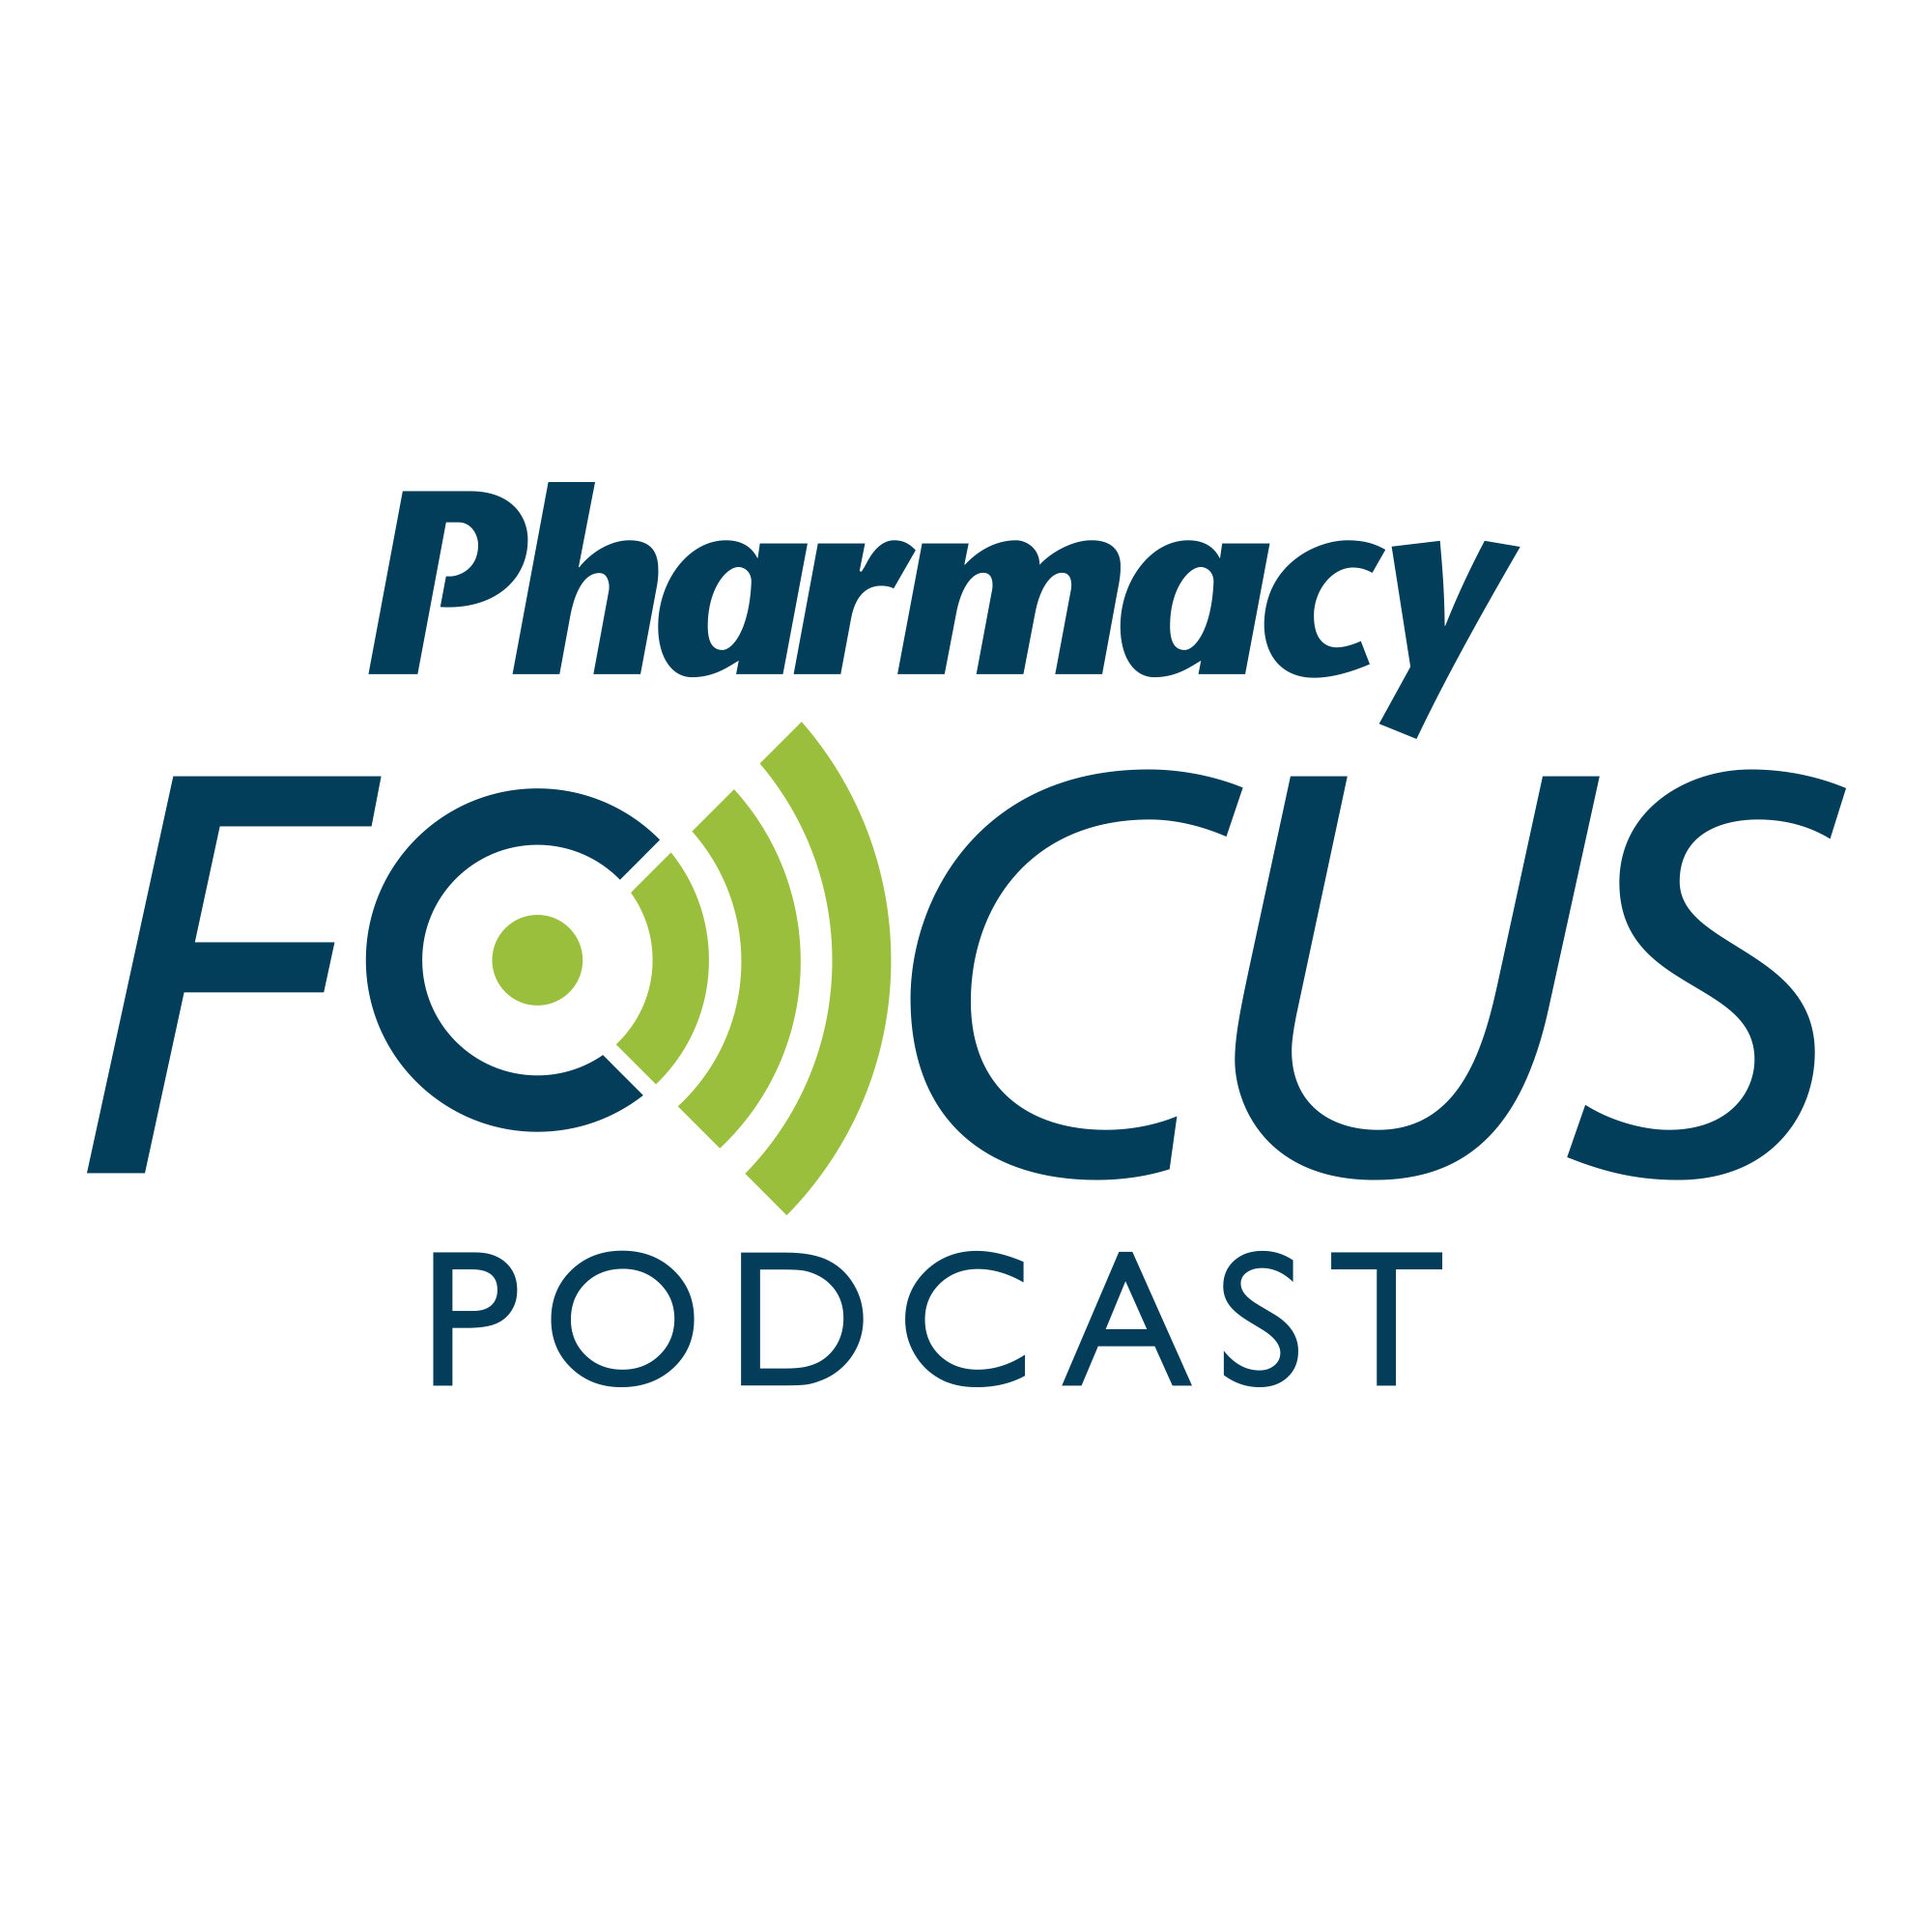 Pharmacy Focus Episode 44: Psychosocial Outcomes in Patients with IBD